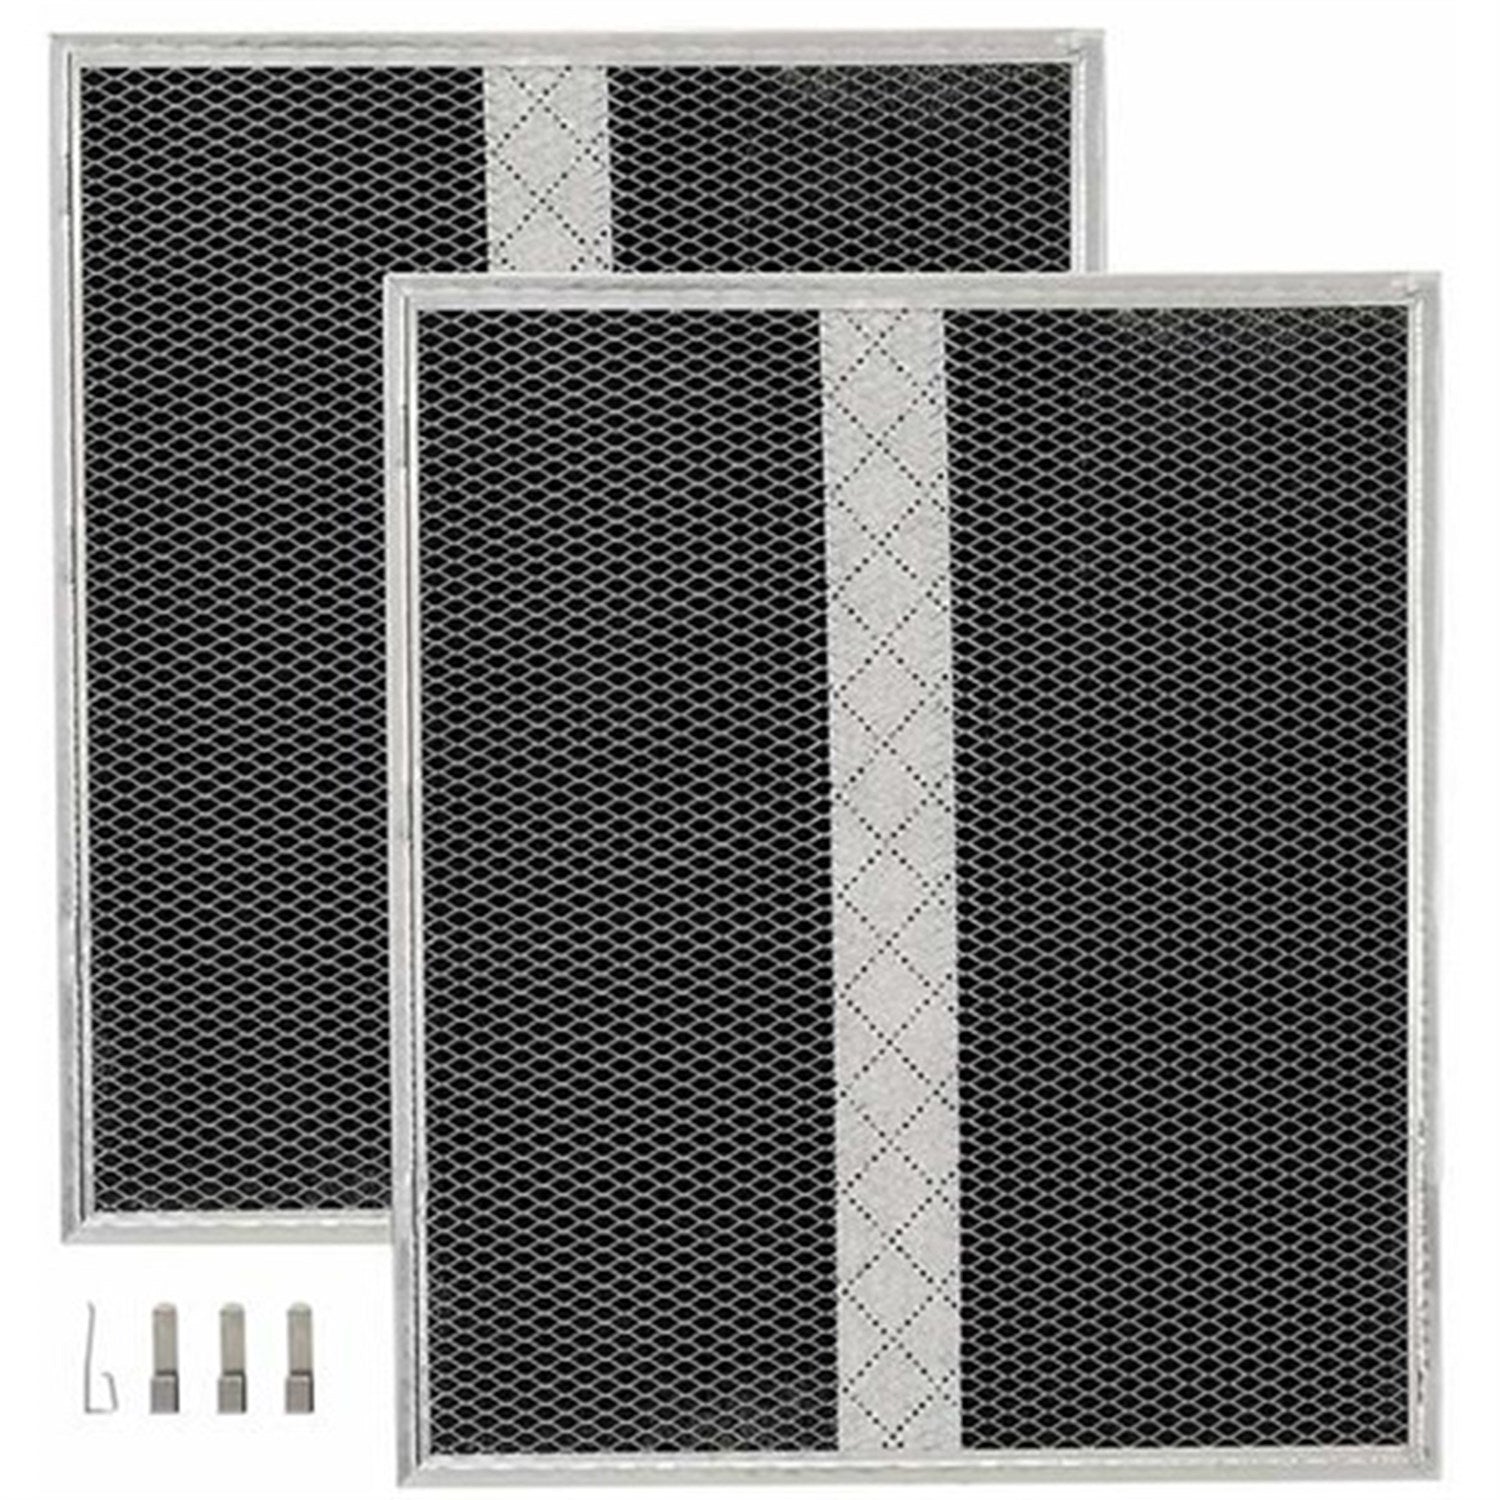 Broan HPF42 Charcoal Filter Kit (2-pack) for Filter Type Xe